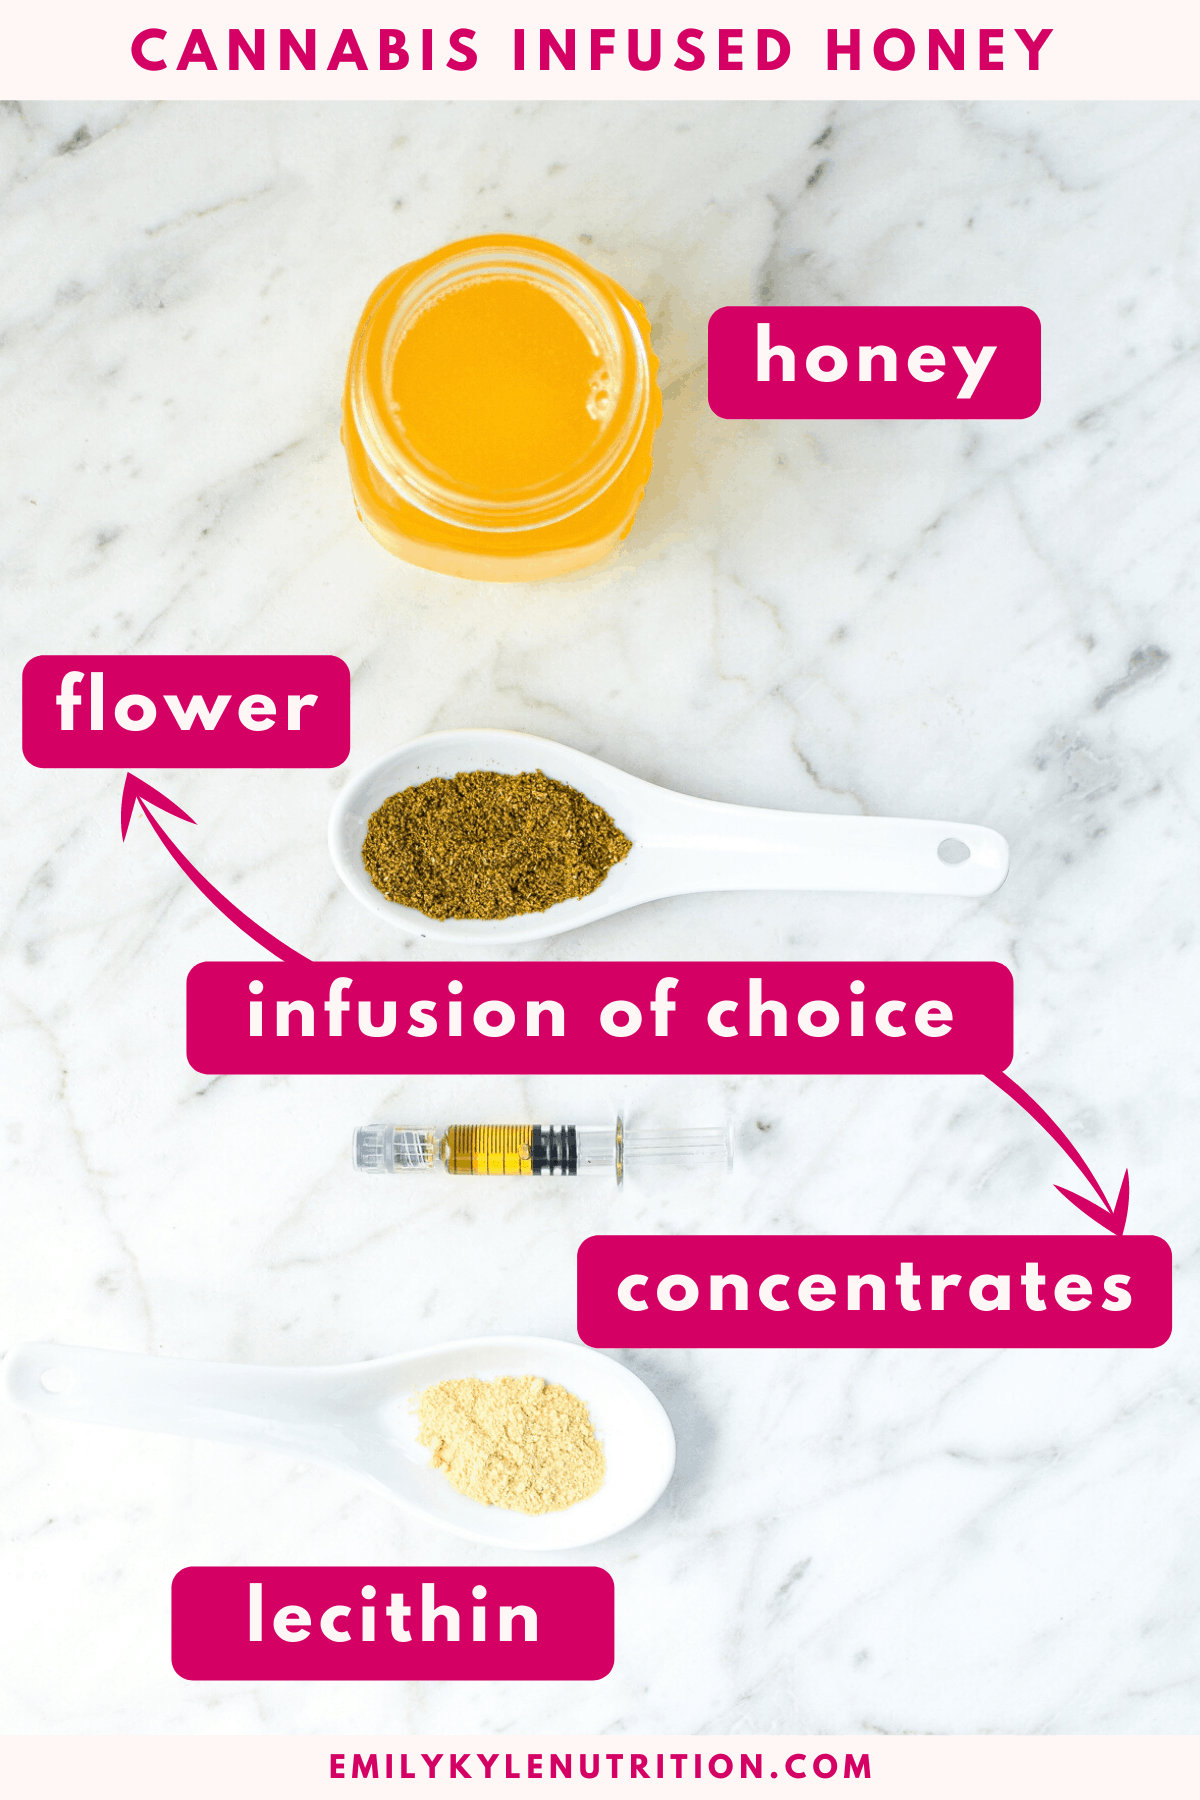 An image showing the ingredients needed to make cannabis honey labeled with pink labels. Includes honey, flower, concentrates and lecithin.